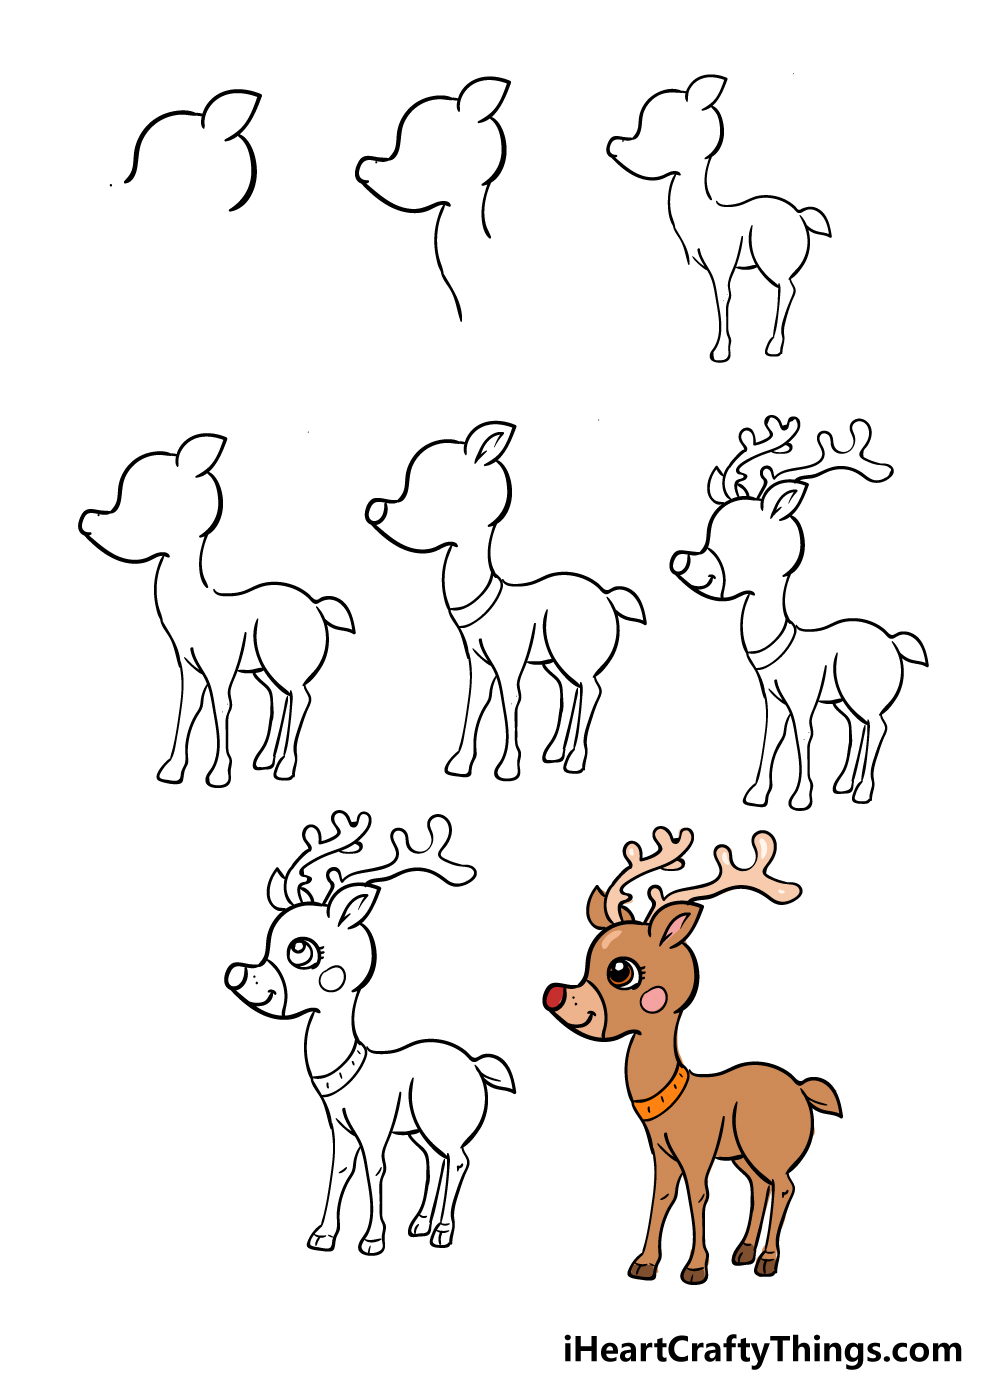 how to draw reindeer in 8 steps